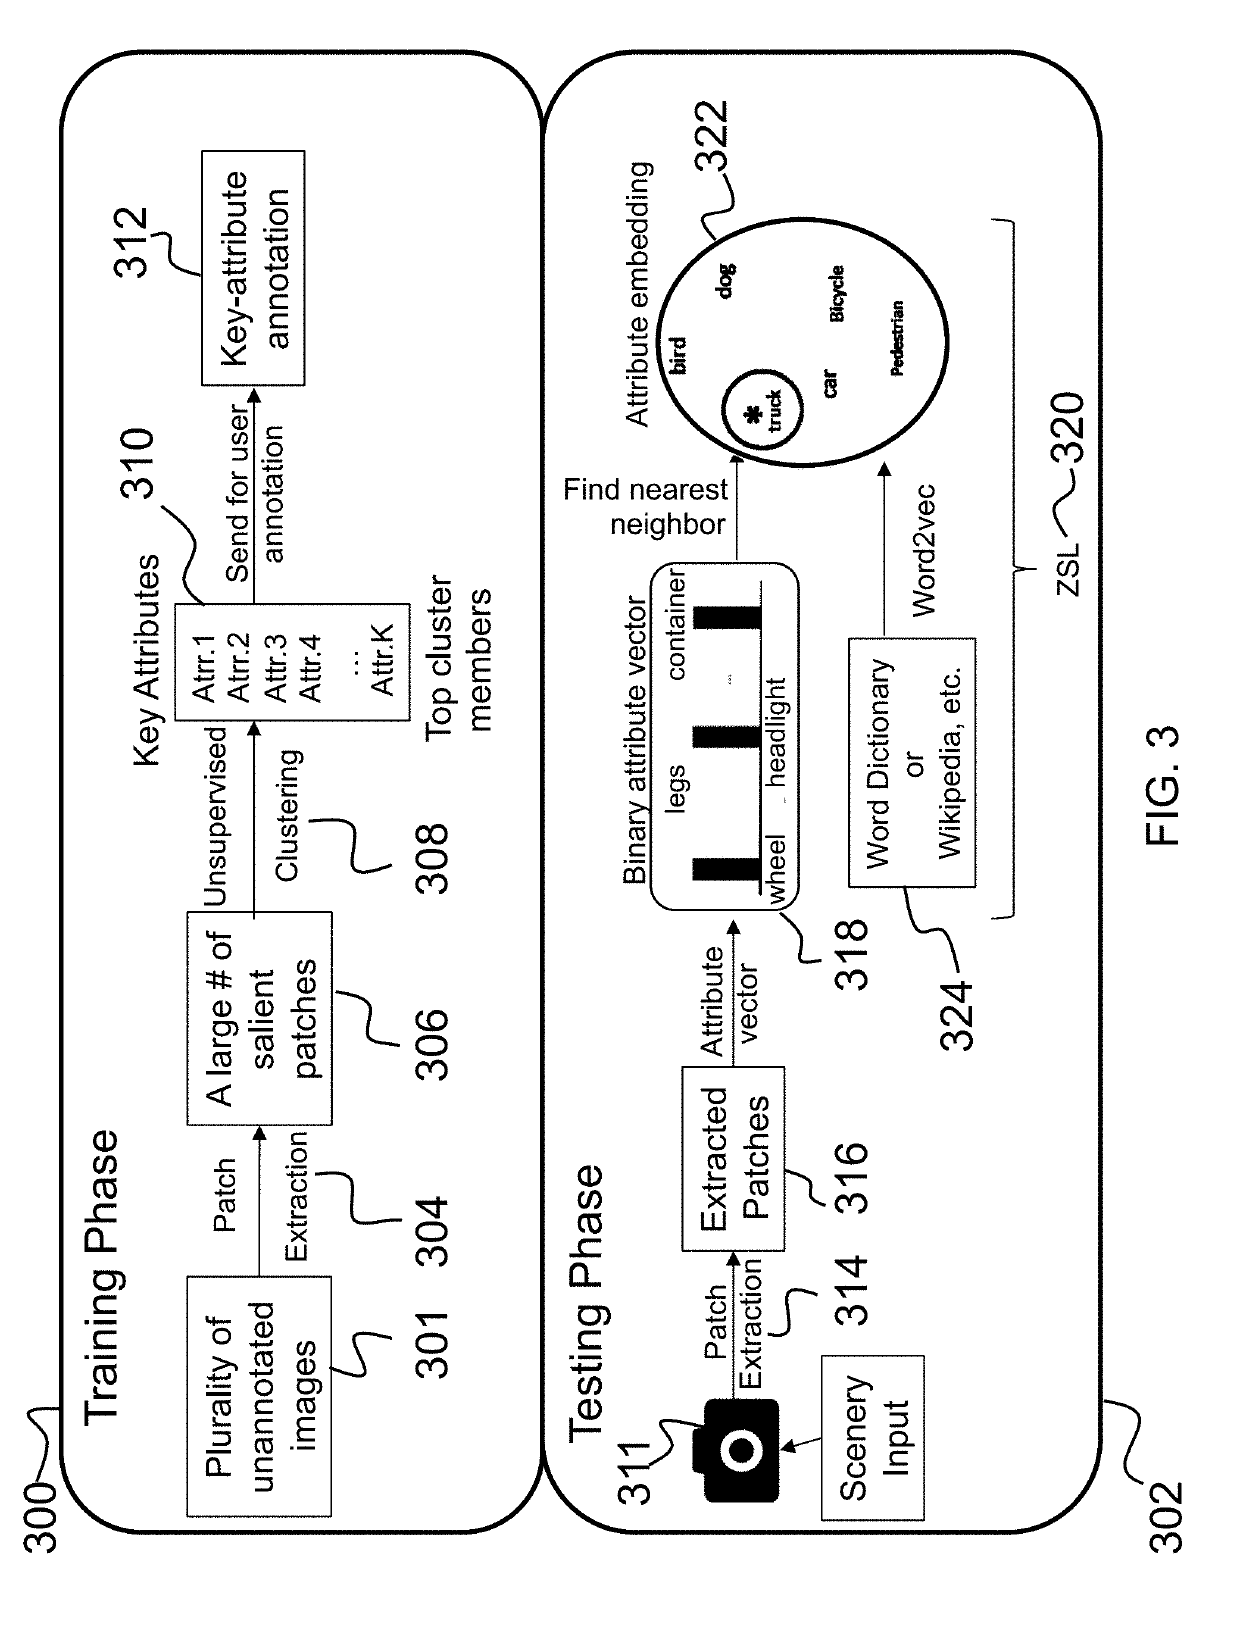 Machine vision system for recognizing novel objects